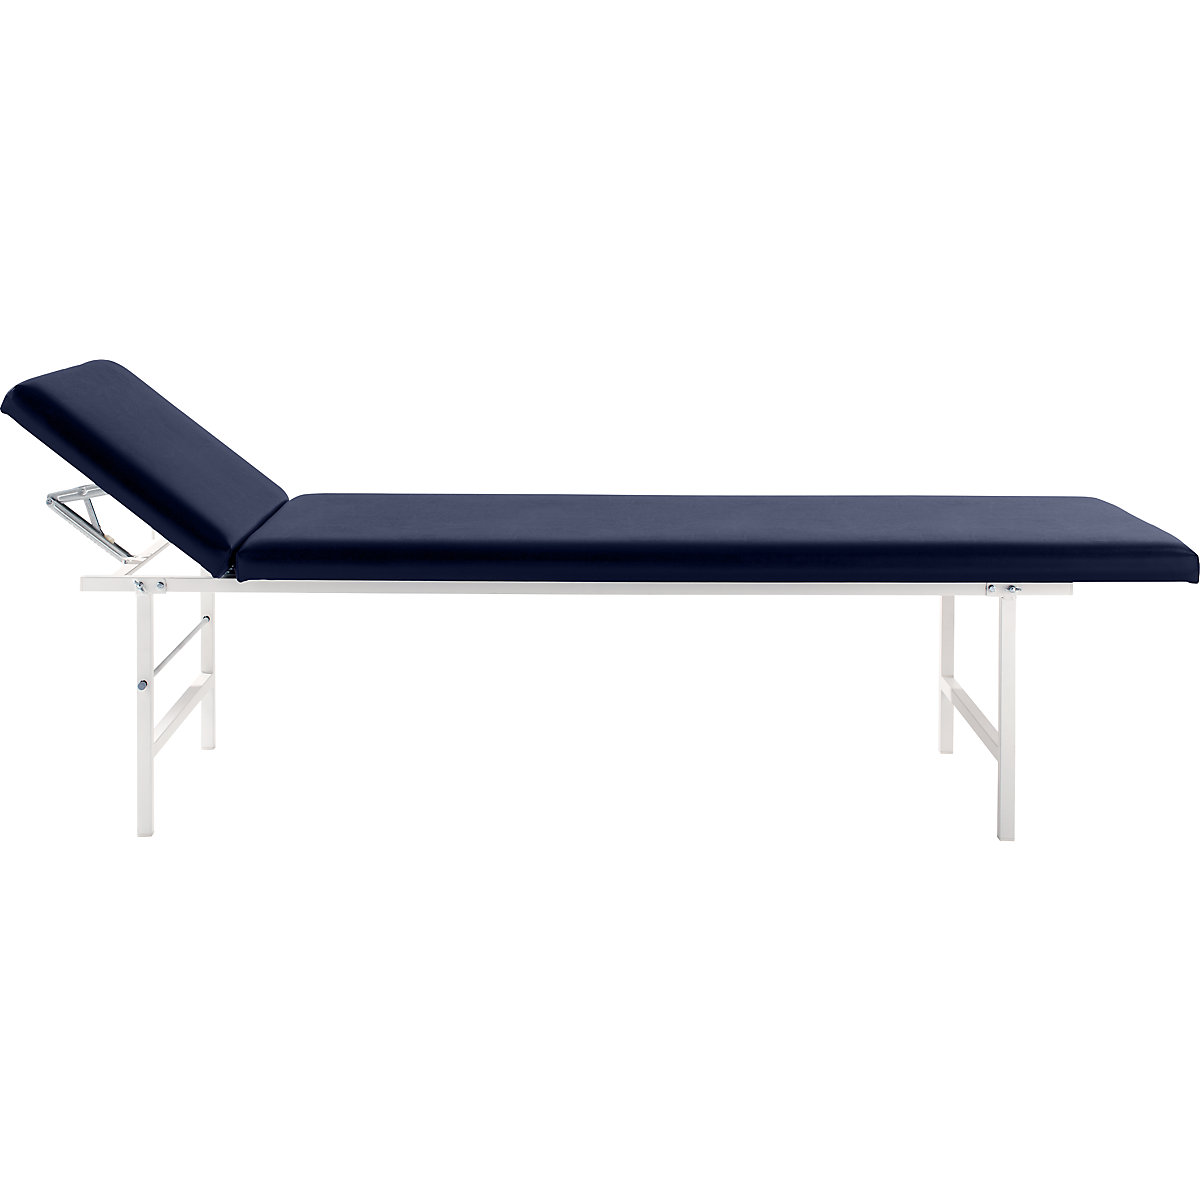 SÖHNGEN – First-aid room couch, adjustable head piece, dark blue fabric covering